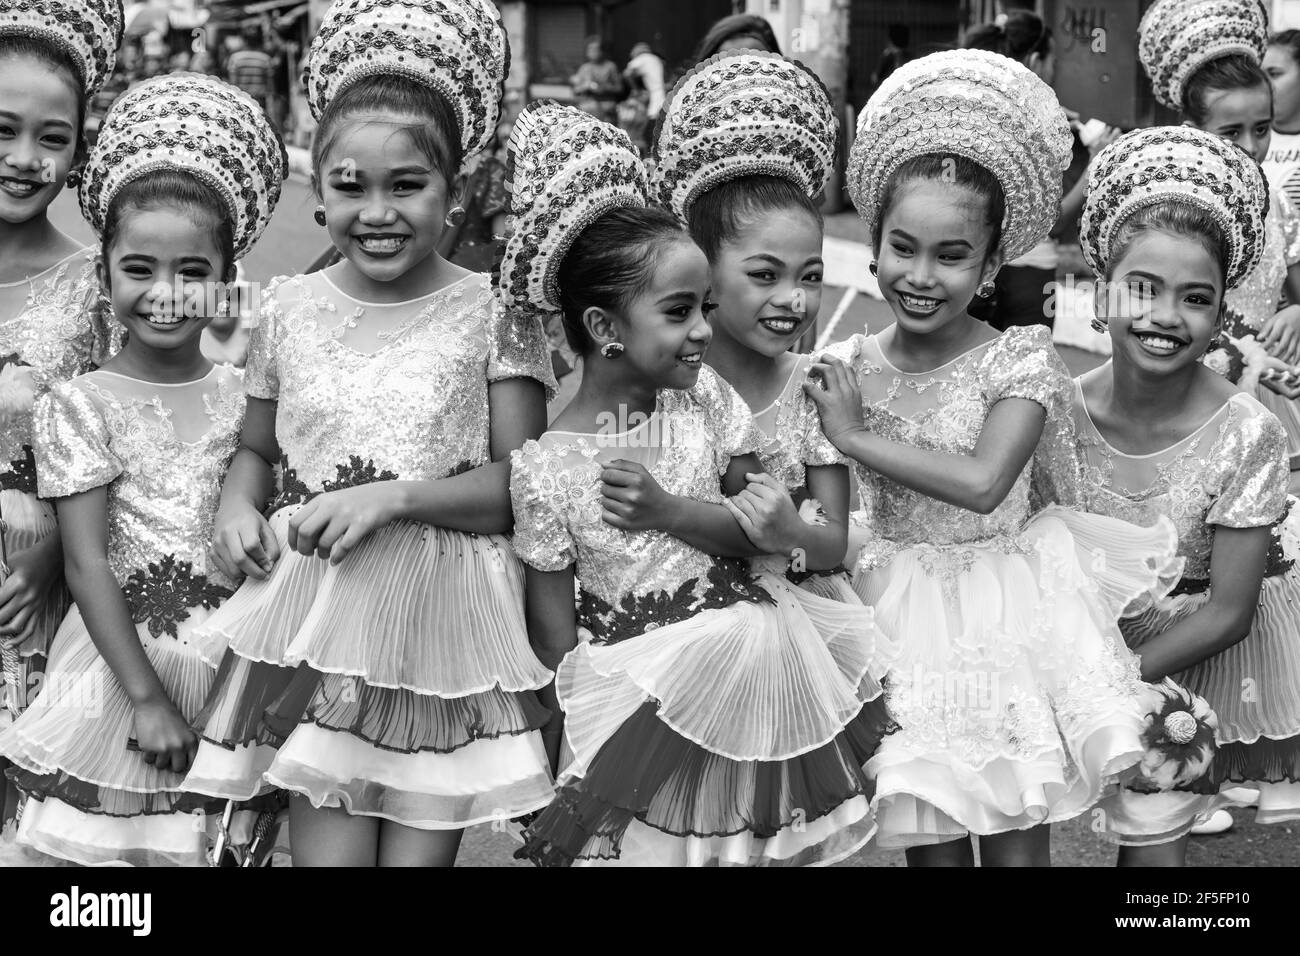 A Group Of Filipino Elementary Schoolchildren Pose For A Photo During The Drum & Bugle Corps Contest, Dinagyang Festival, Iloilo City, The Philippines. Stock Photo